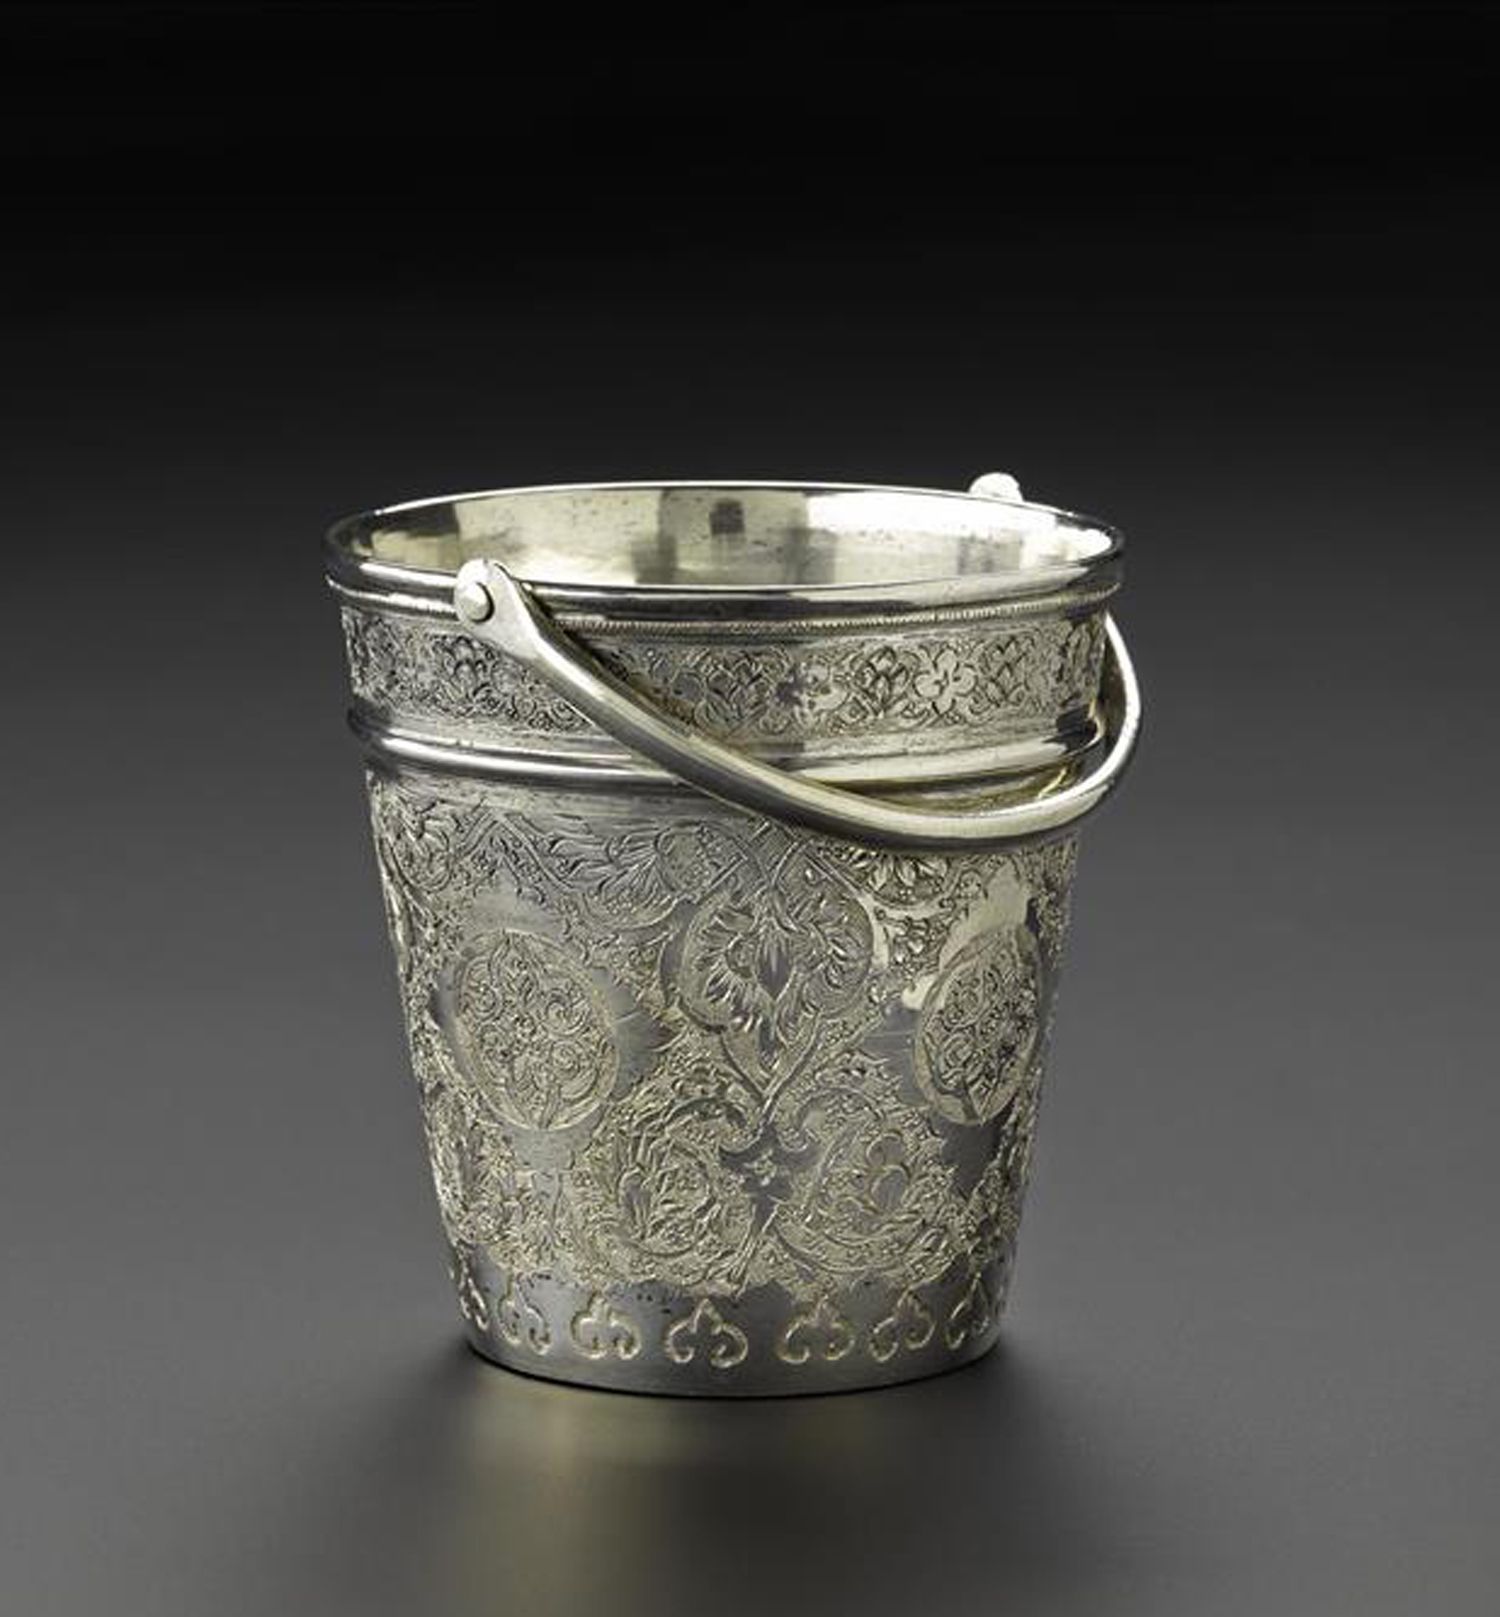 Miniature ice bucket of silver, with a handle and floral decoration around the outside, Iran, probably Isfahan, 1920s-1940s, acc. no V.2015.67